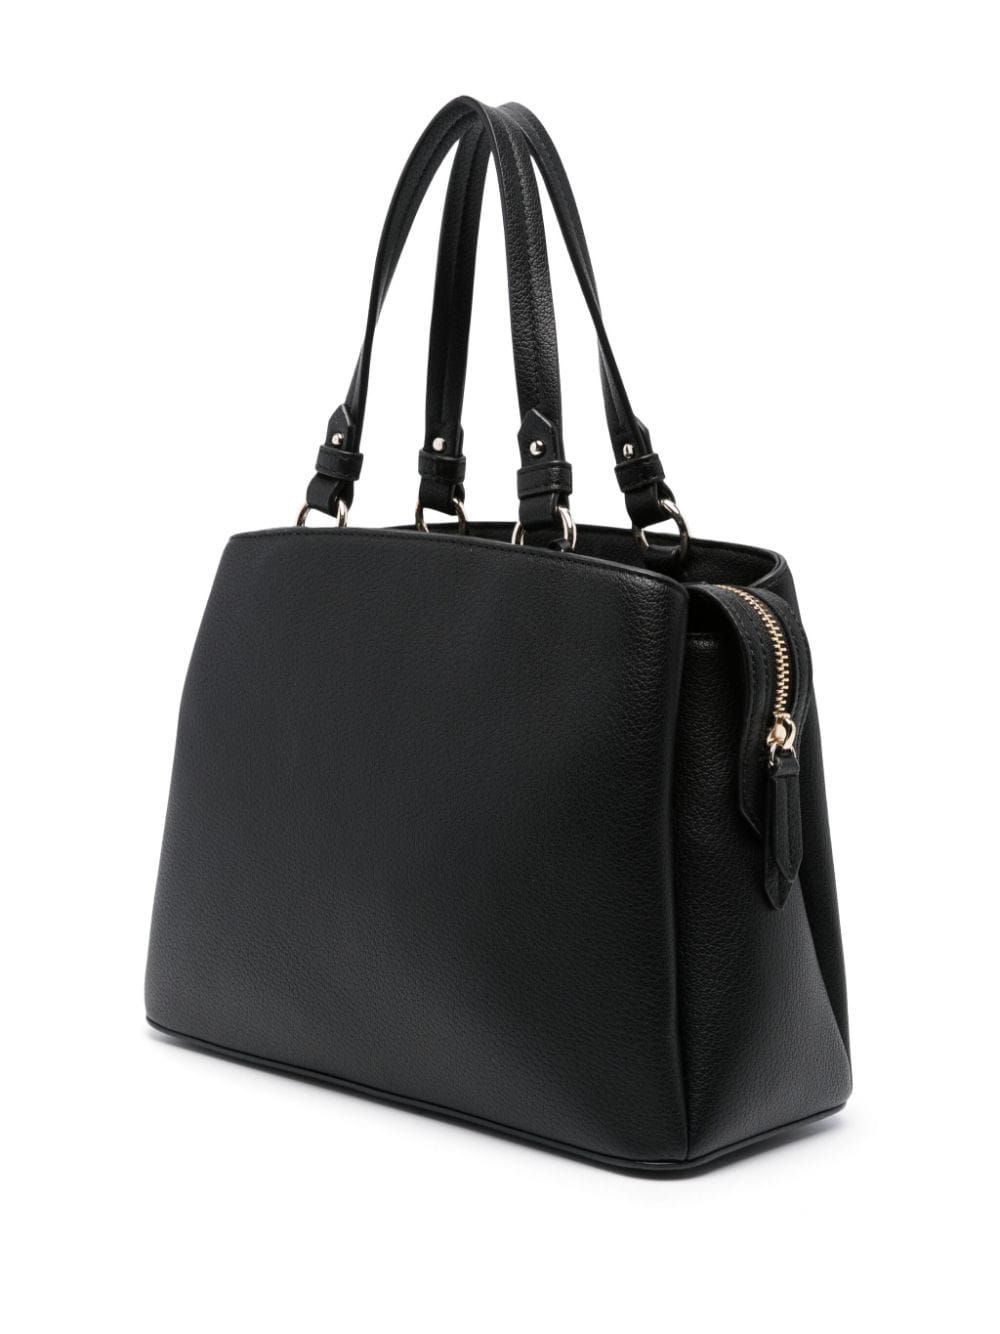 Shop Dkny Seventh Avenue Leather Tote Bag In Black